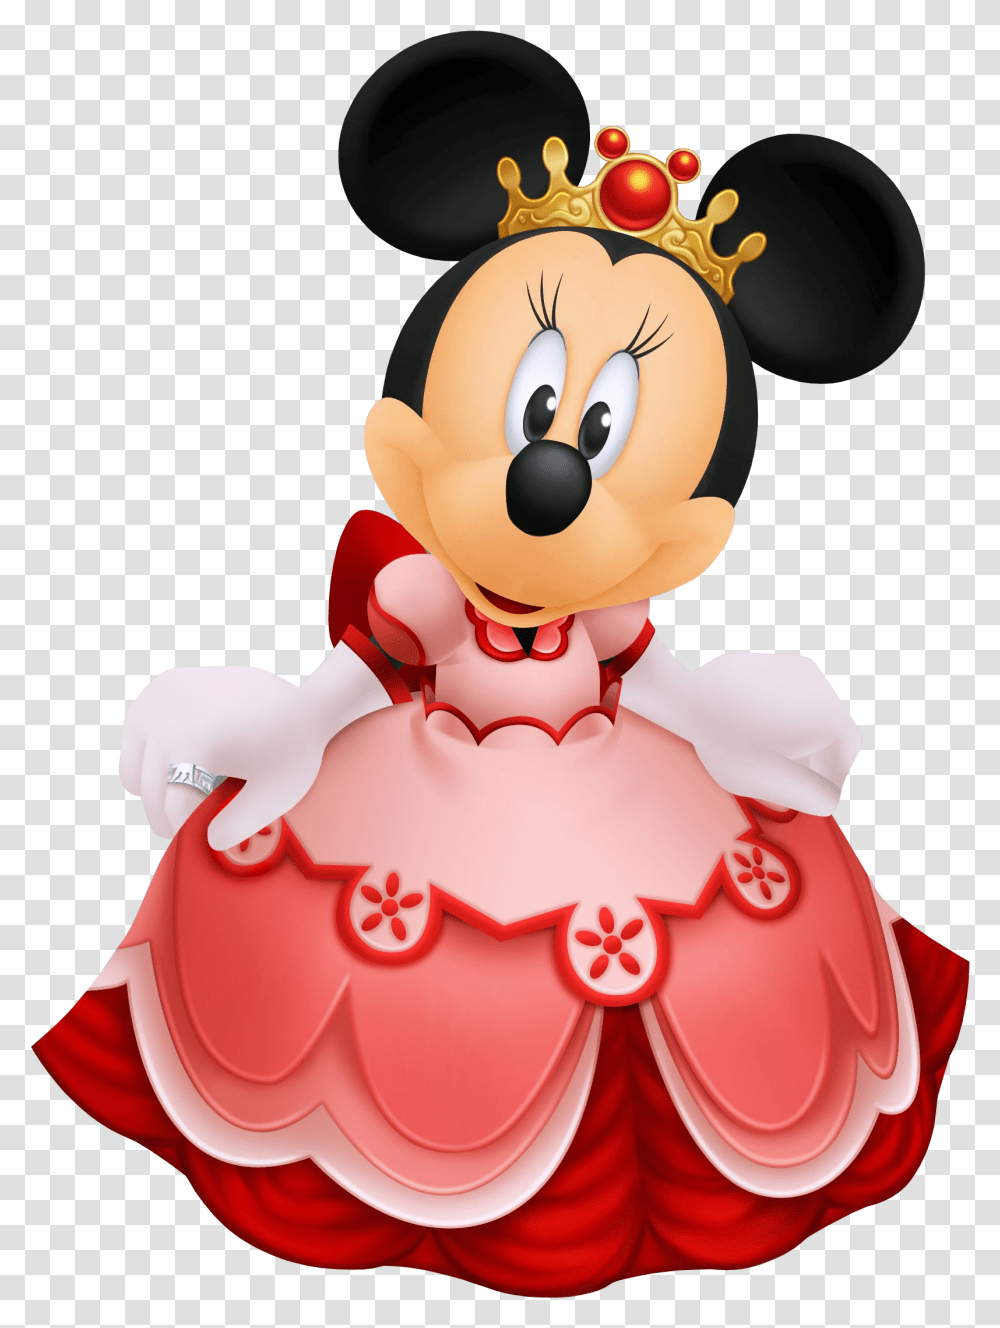 Mickey Mouse Clipart Gold Minnie Mouse Princess, Snowman, Cake, Dessert, Food Transparent Png